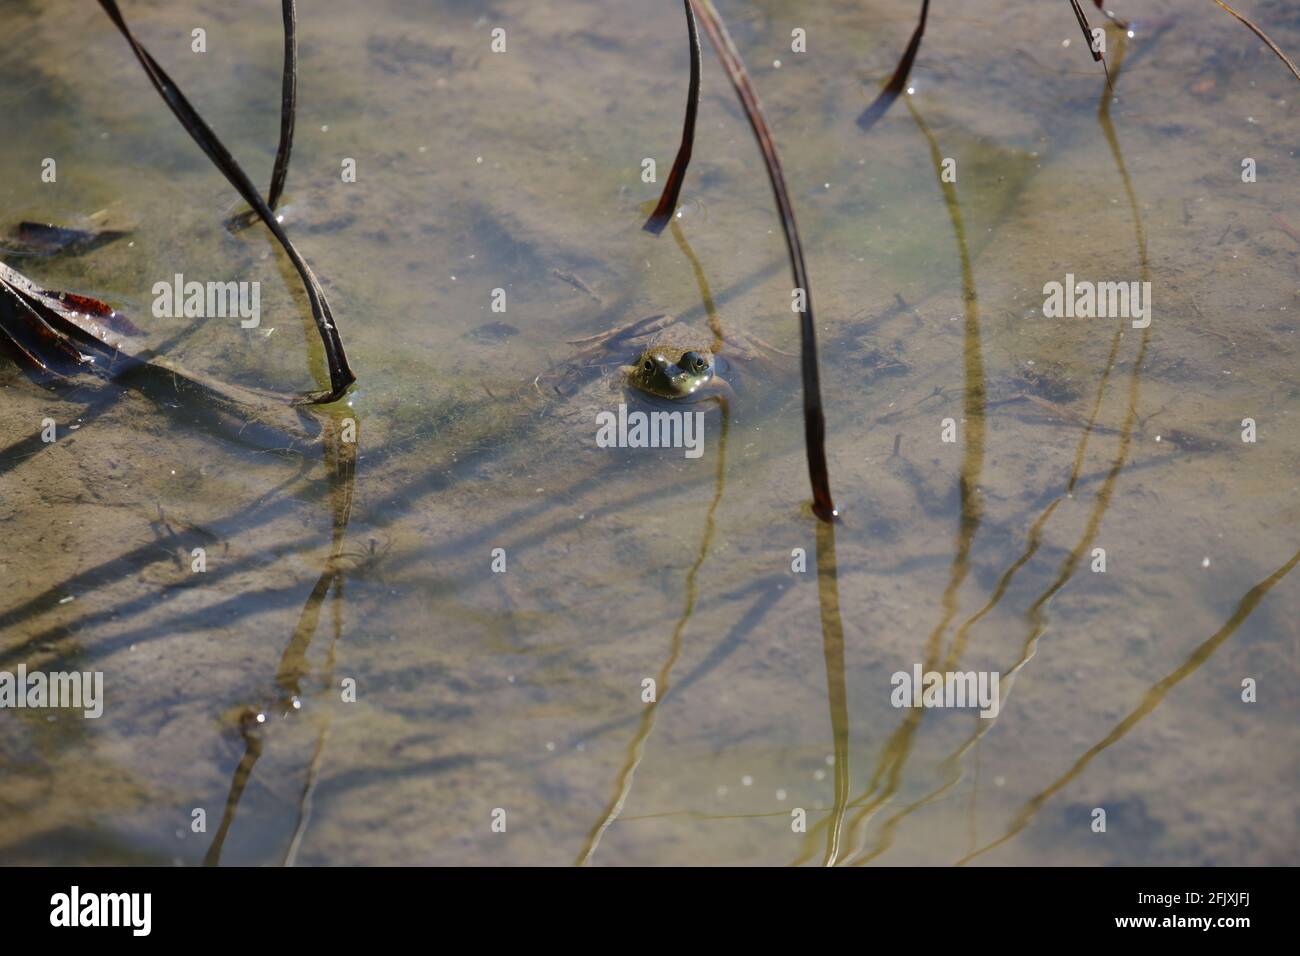 Frog's eyes looking above water in shallow pond Stock Photo